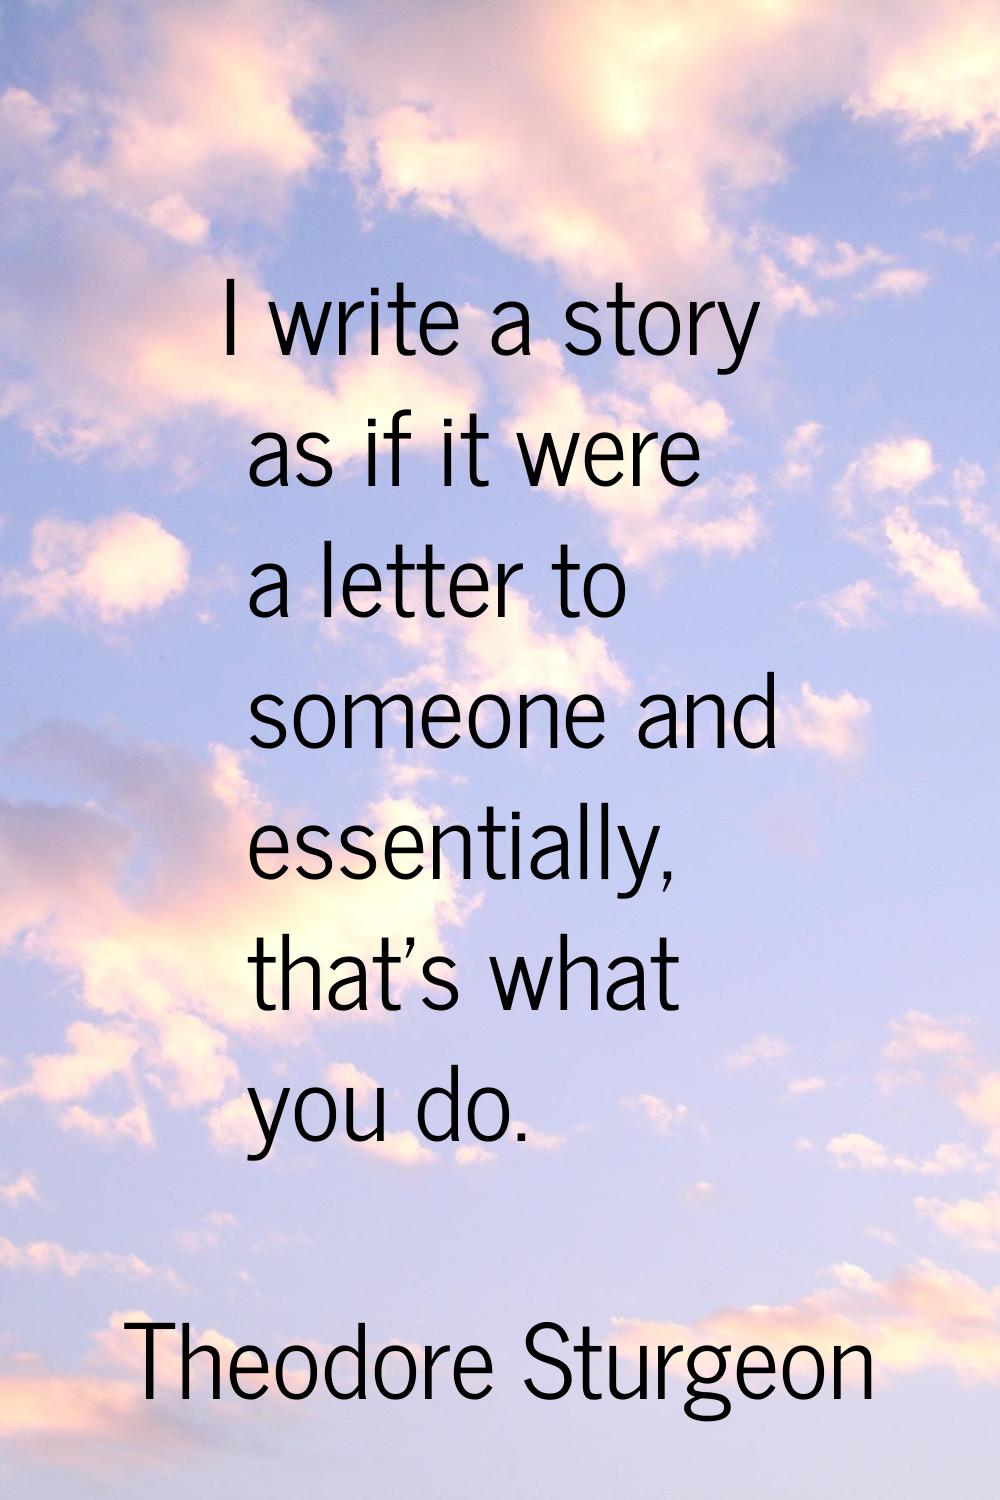 I write a story as if it were a letter to someone and essentially, that's what you do.